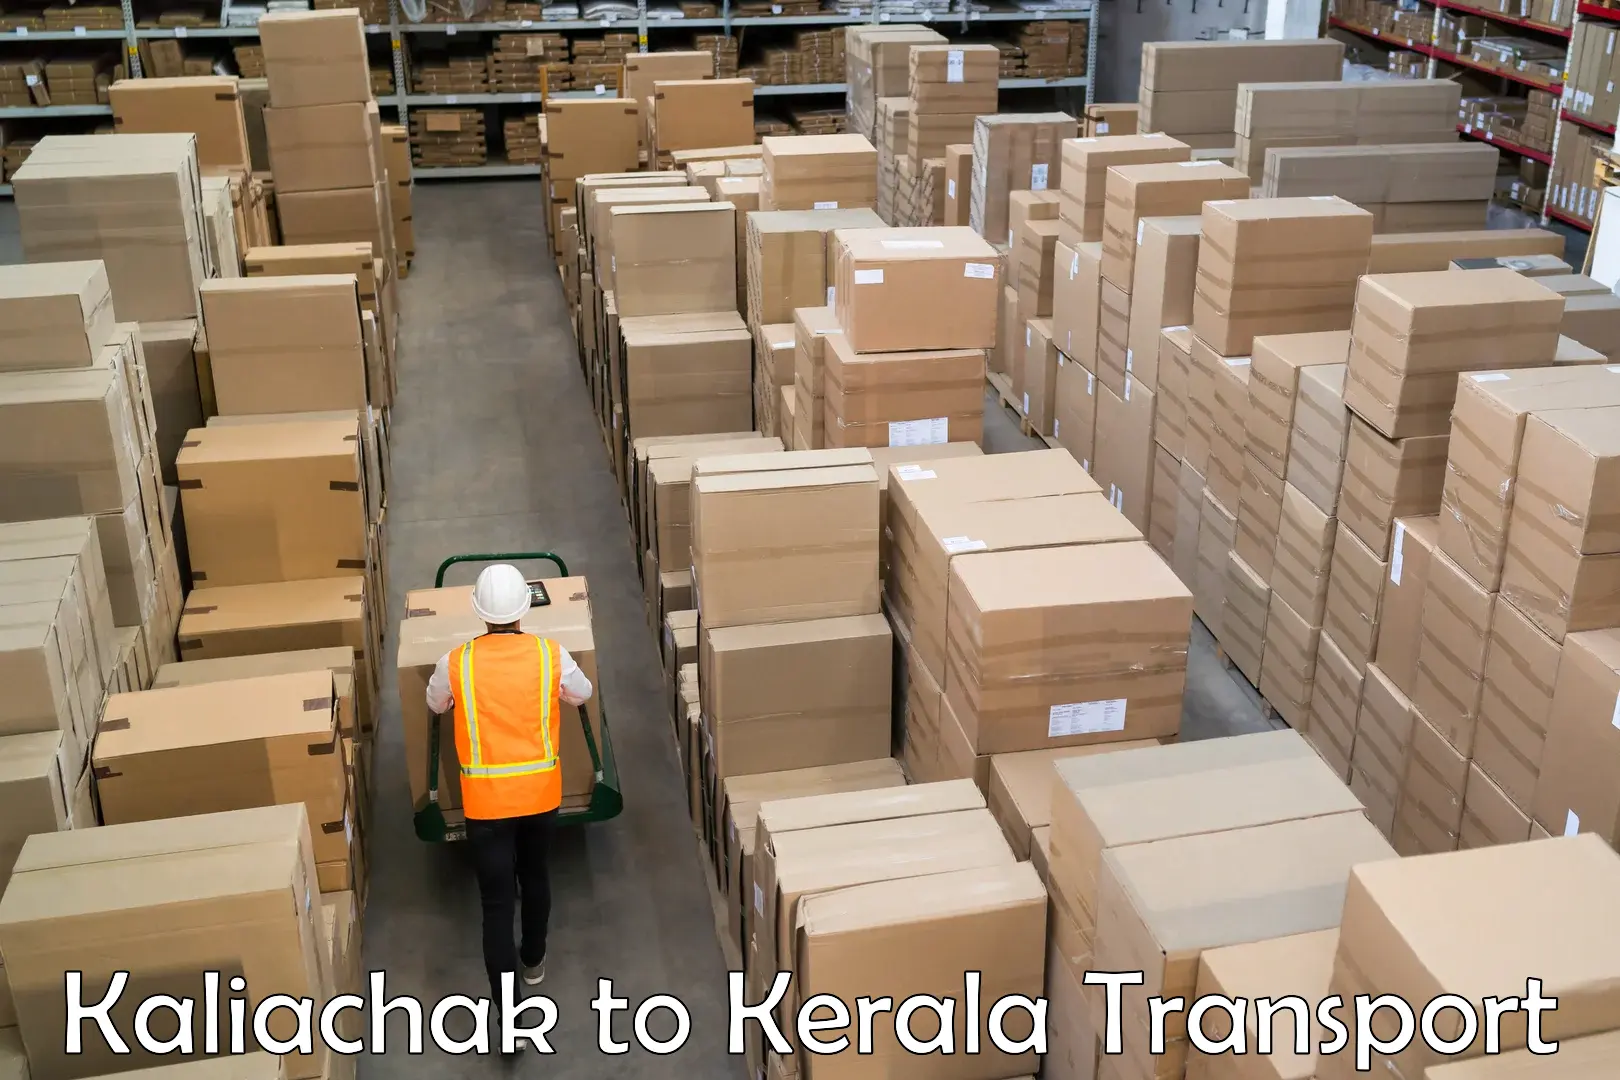 Parcel transport services in Kaliachak to Taliparamba